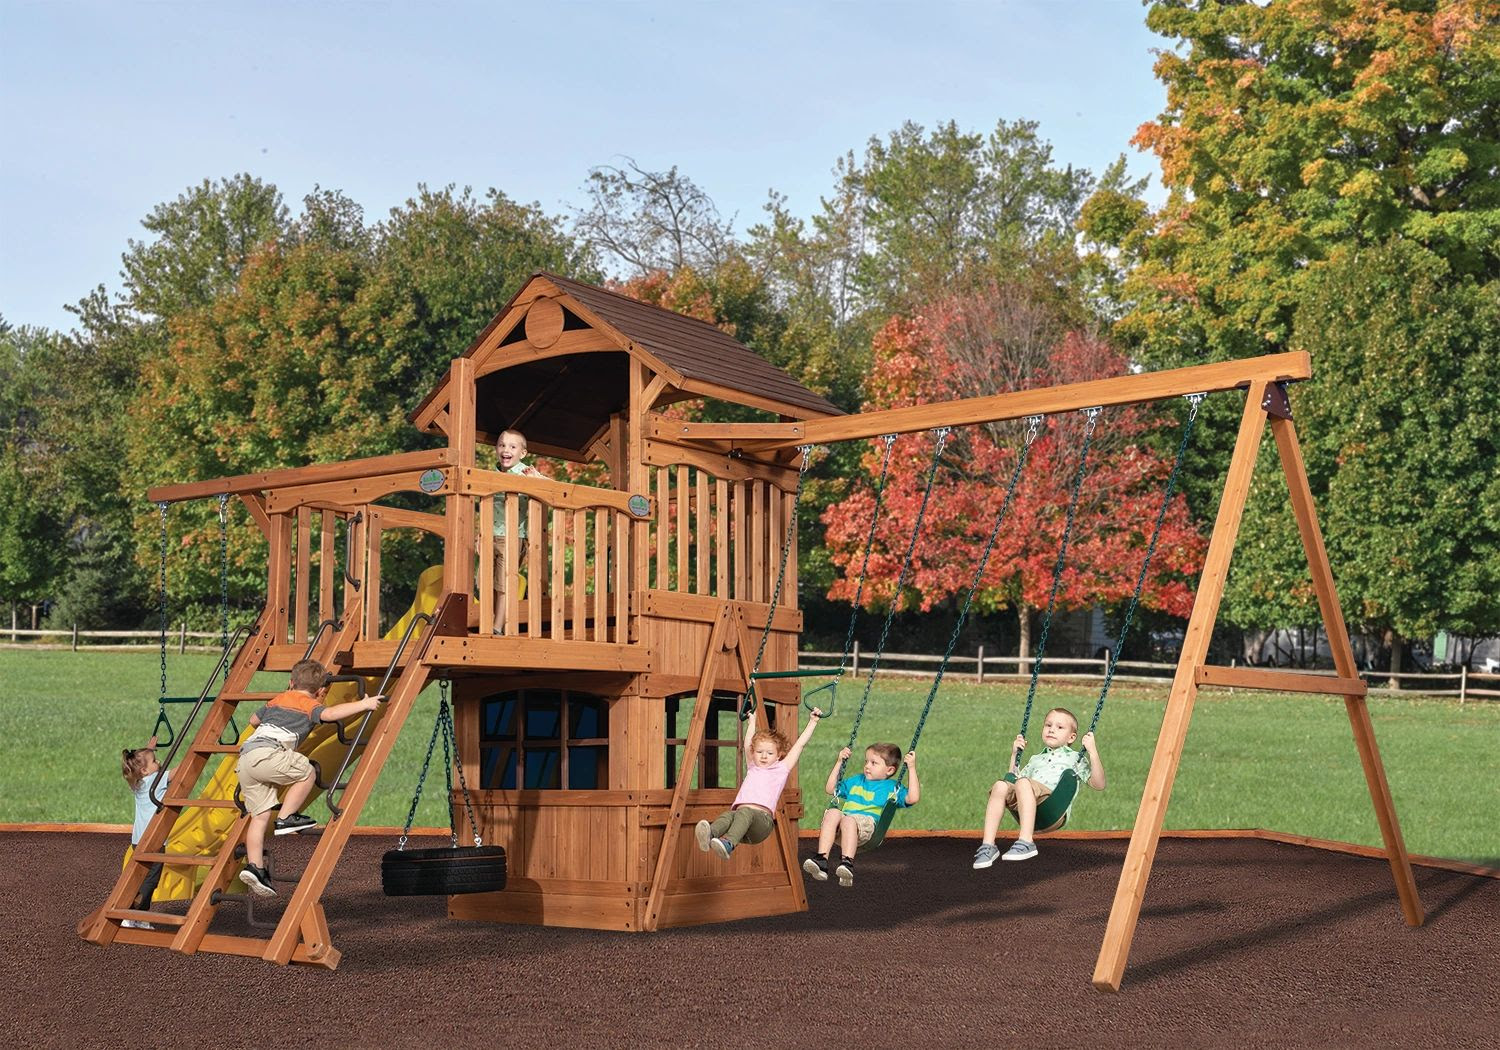 Ultimate Playsets Inc Backyard Adventures Of Colorado Playsets In Denver Playground Equipment Playground